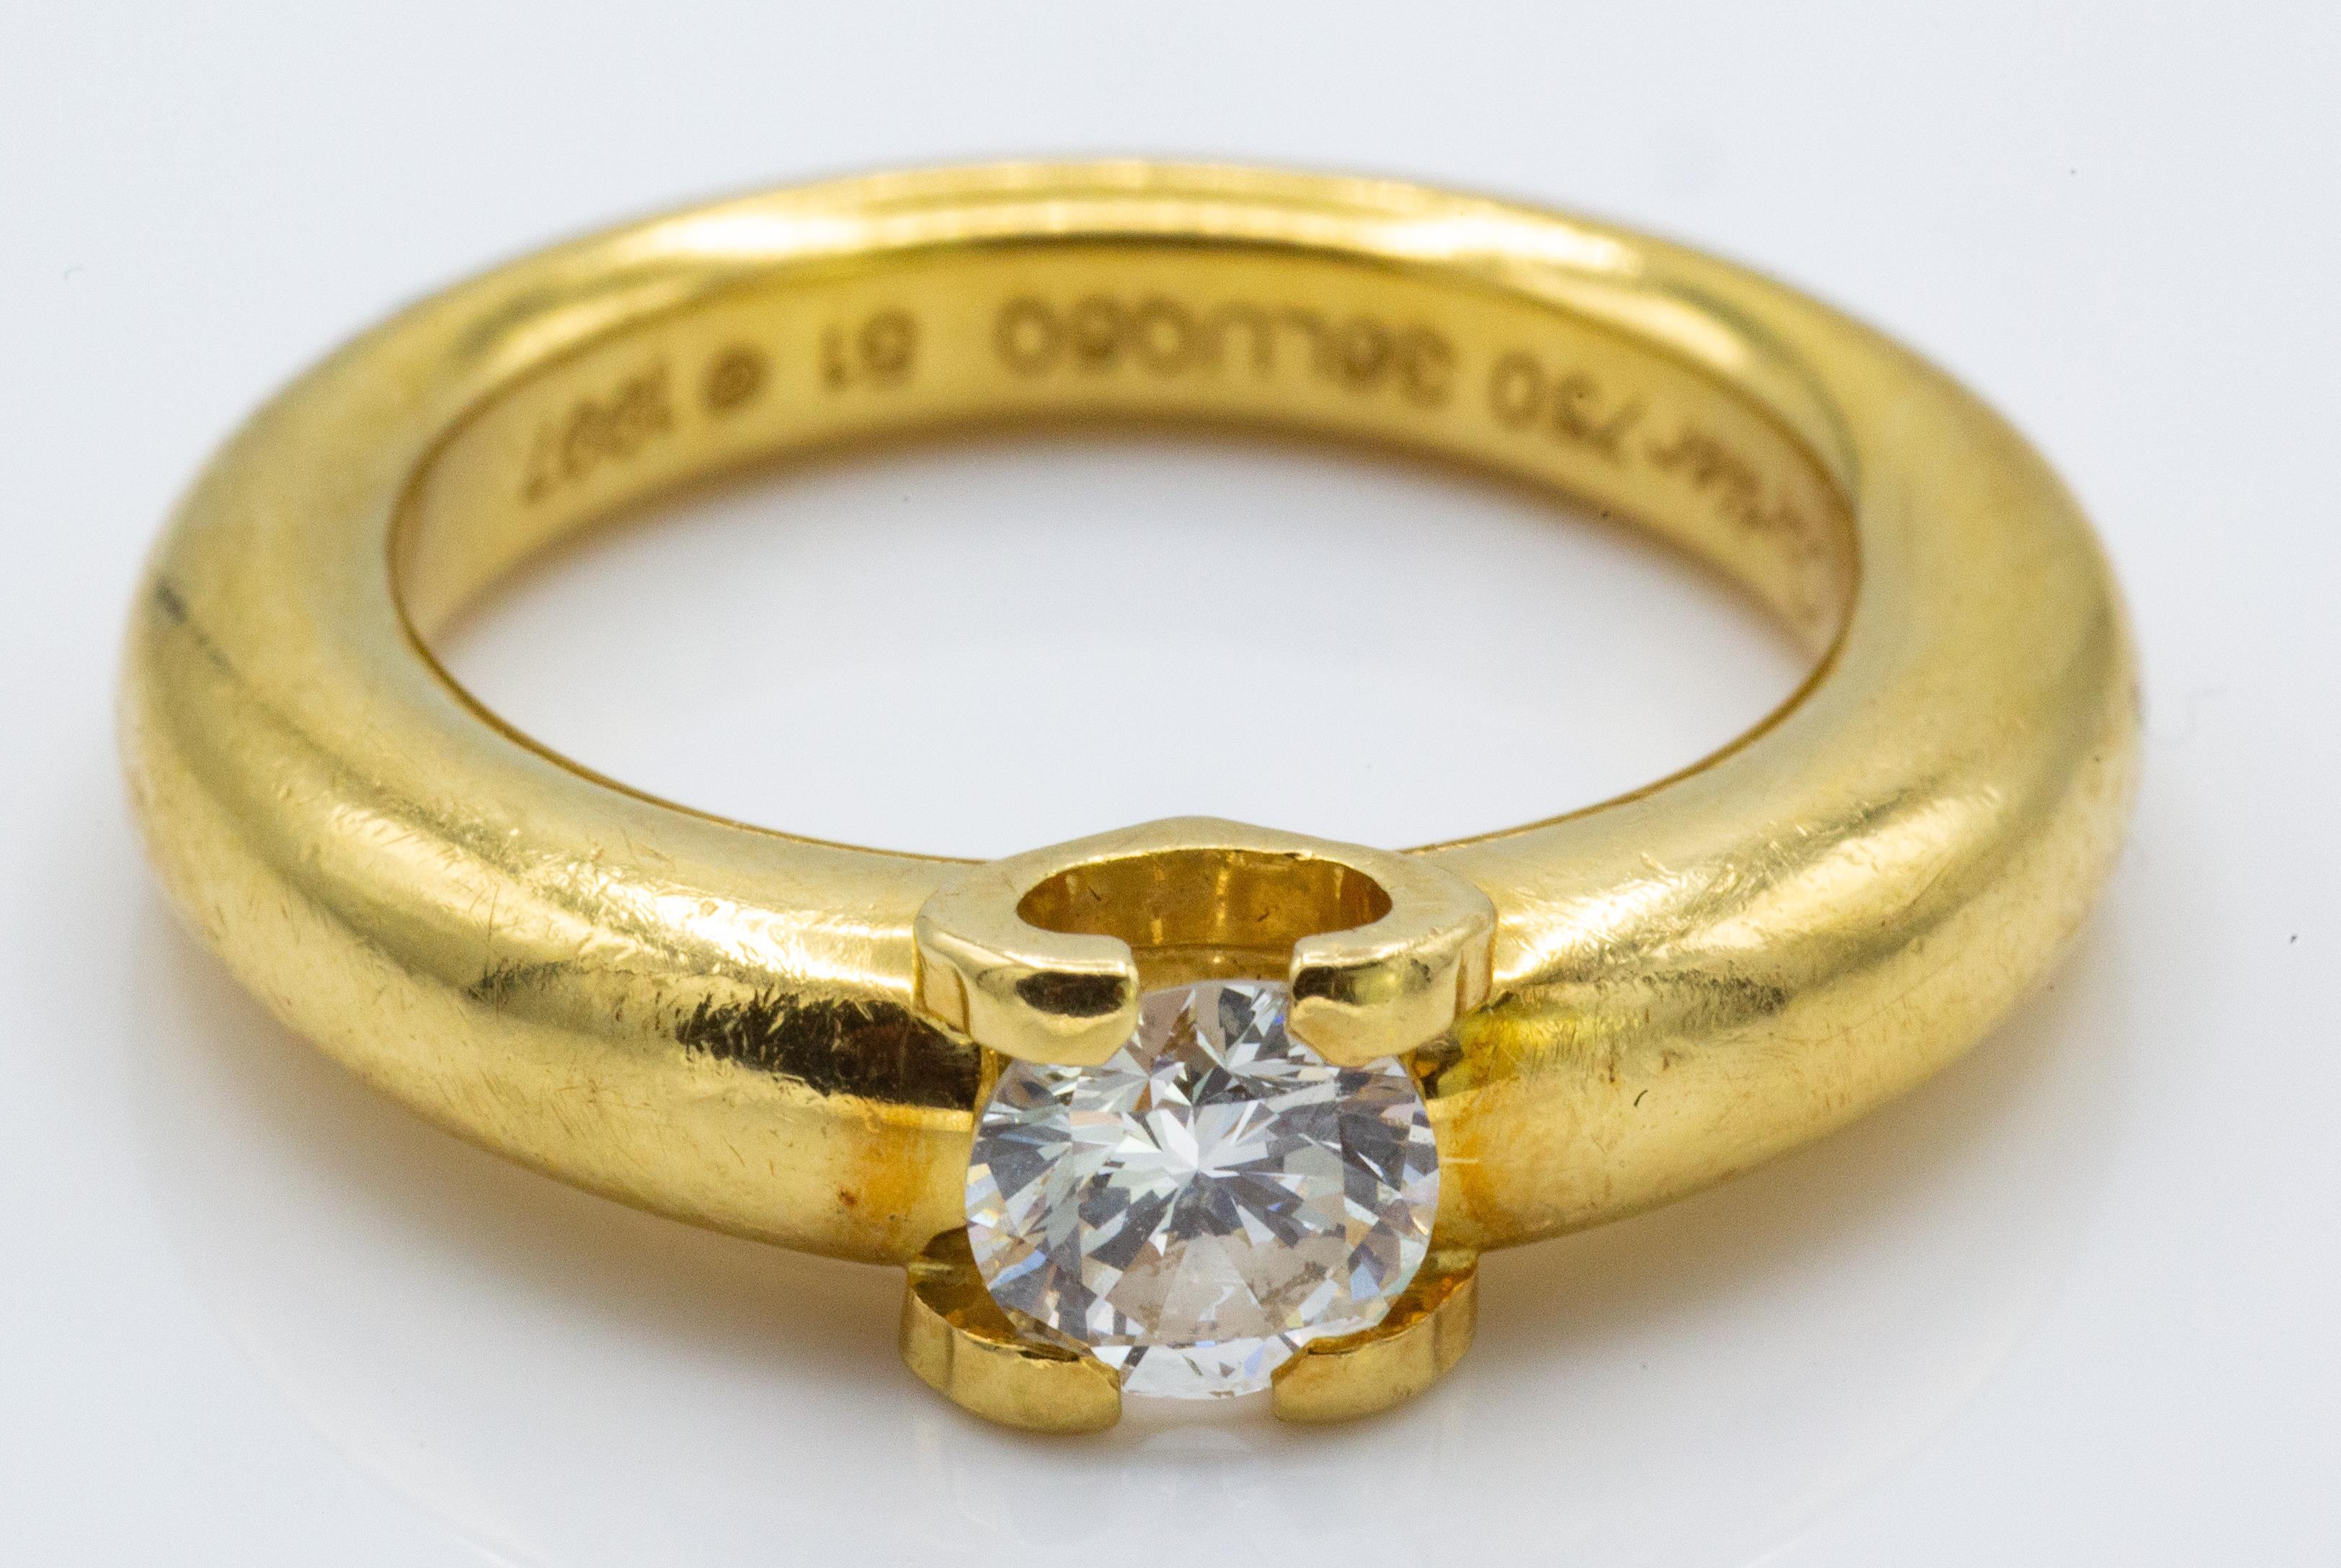 A Cartier 18ct Gold & Diamond Solitaire Ring